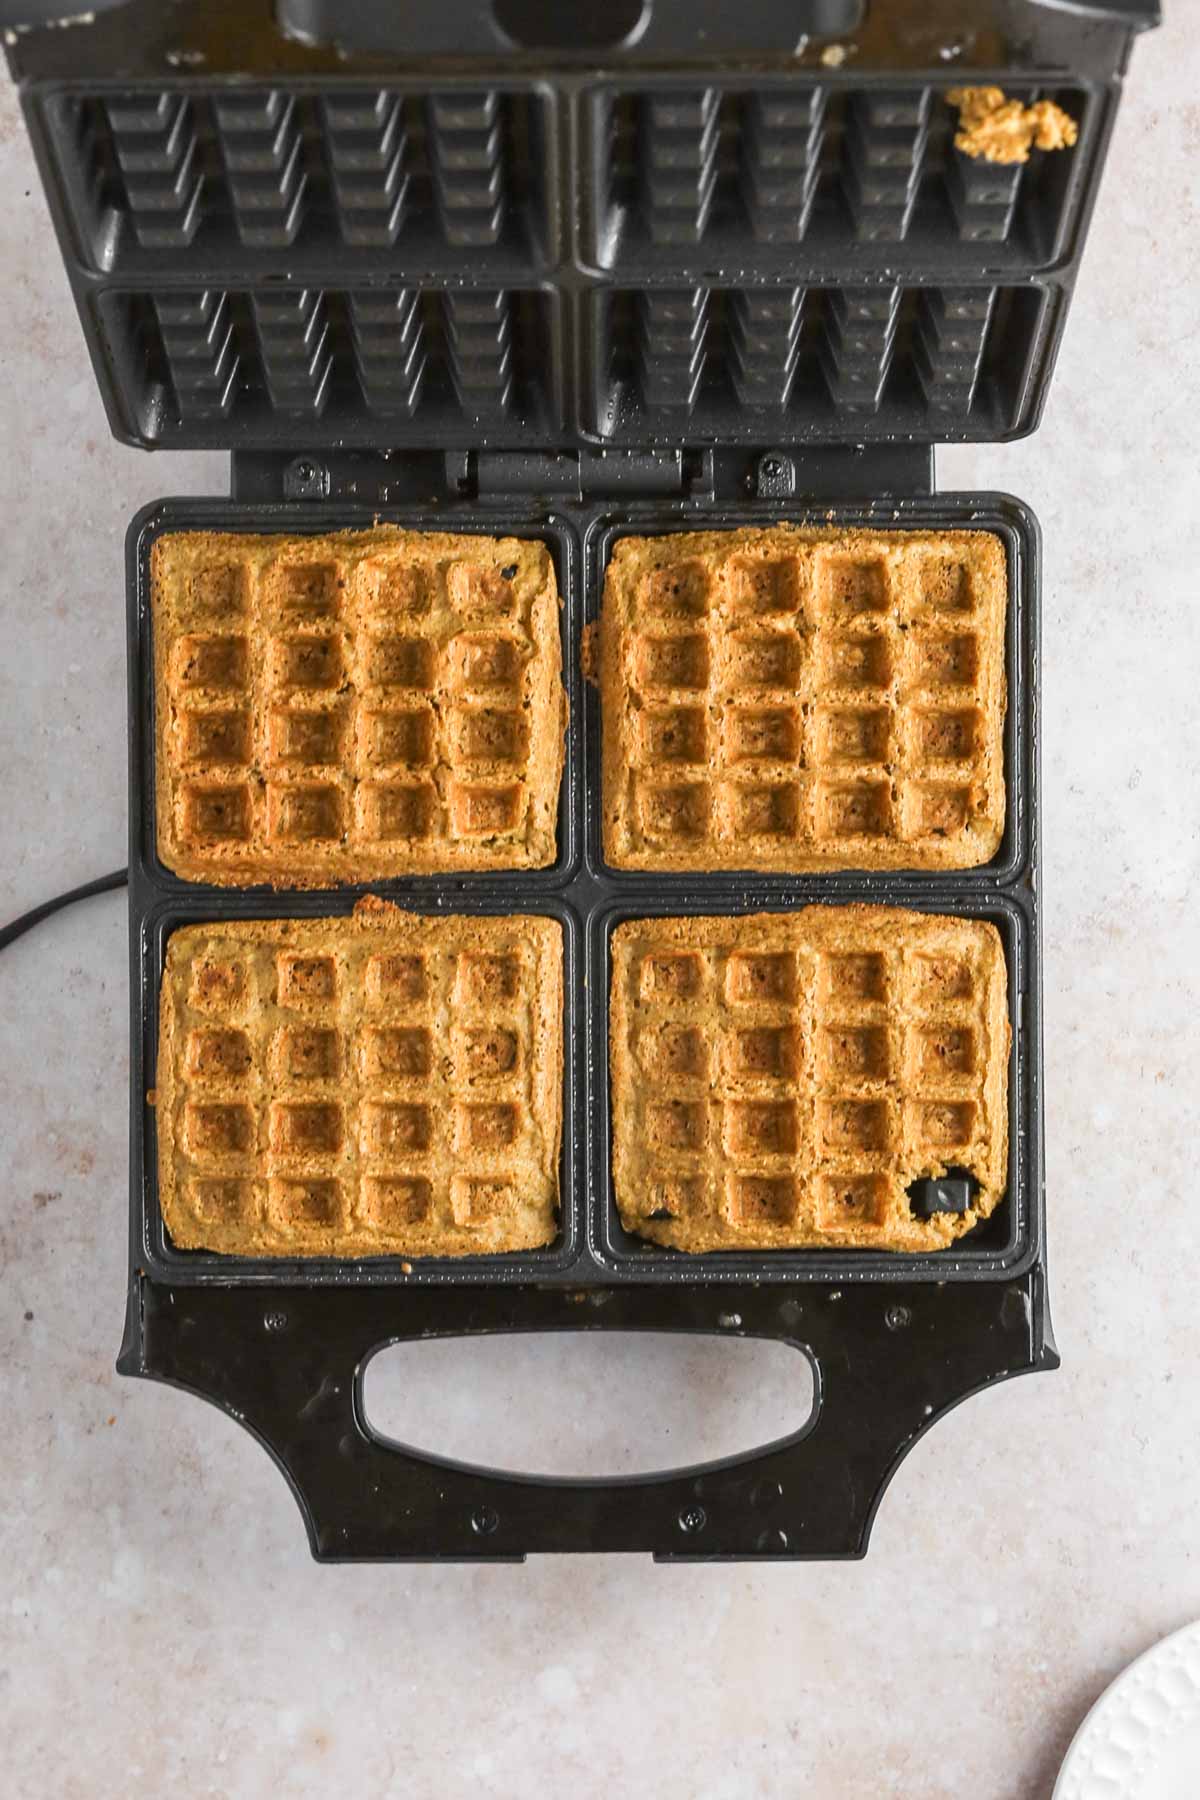 cooked, golden-brown waffles in the waffle iron before being removed.